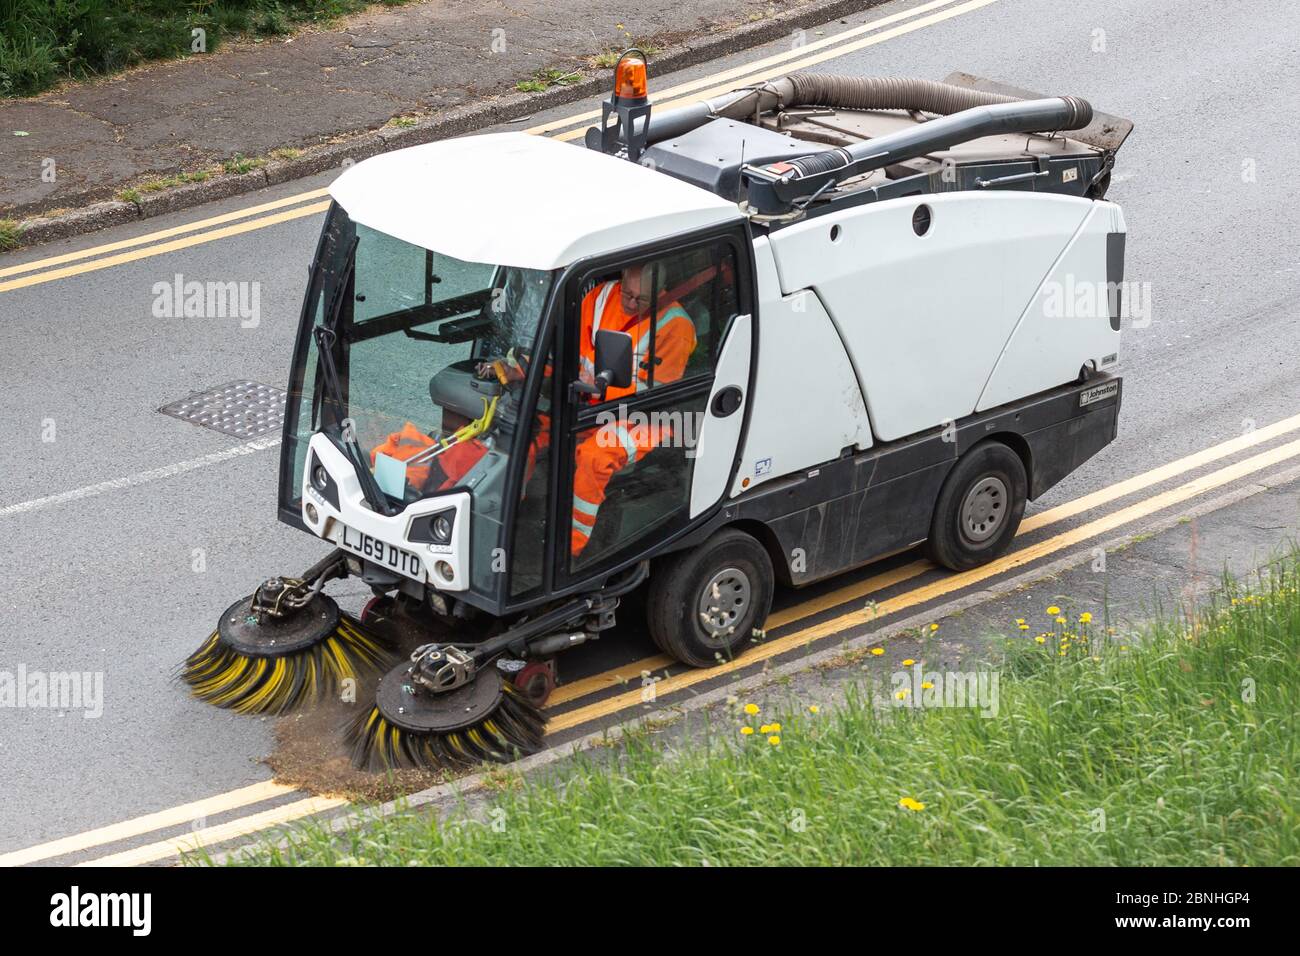 Newport, Wales, UK. 15th May, 2020. A street sanitation vehicle driven by a city council key worker cleans the streets during the eighth week of  the Covid-19 pandemic lockdown in the UK. Credit: Tracey Paddison/Alamy Live News Stock Photo